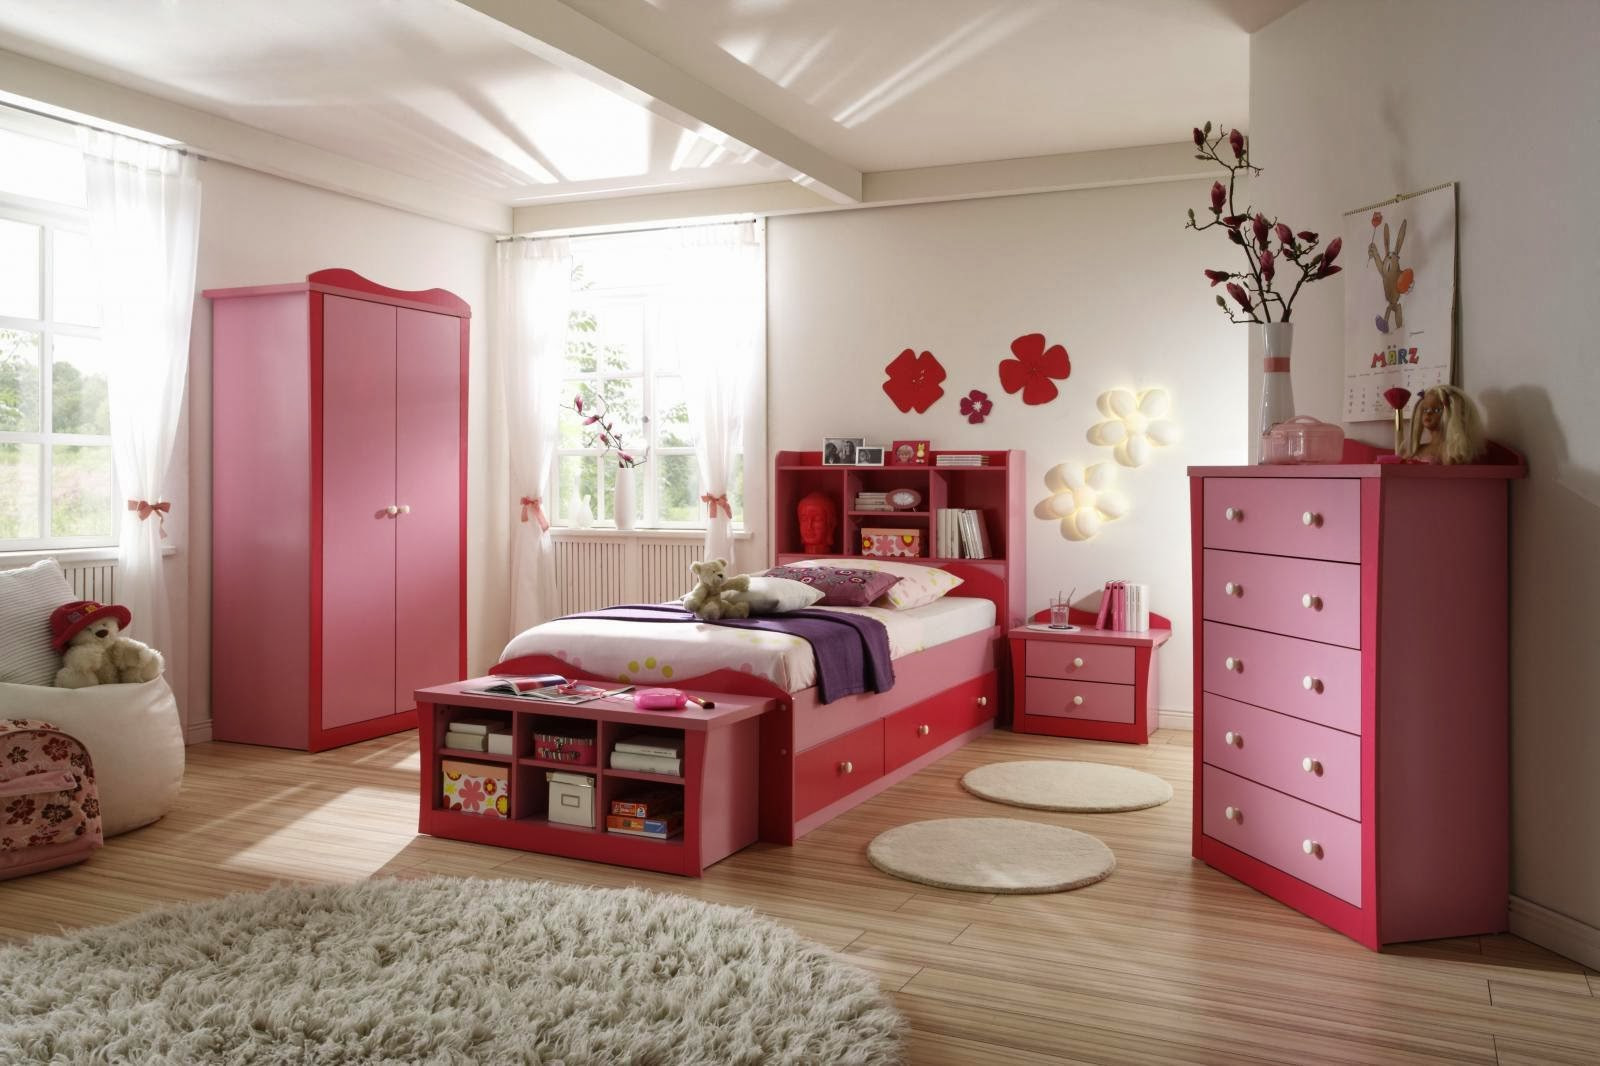 Cute Girl Bedroom Ideas
 Home Decorating Interior Design Ideas Pink Bedding for a